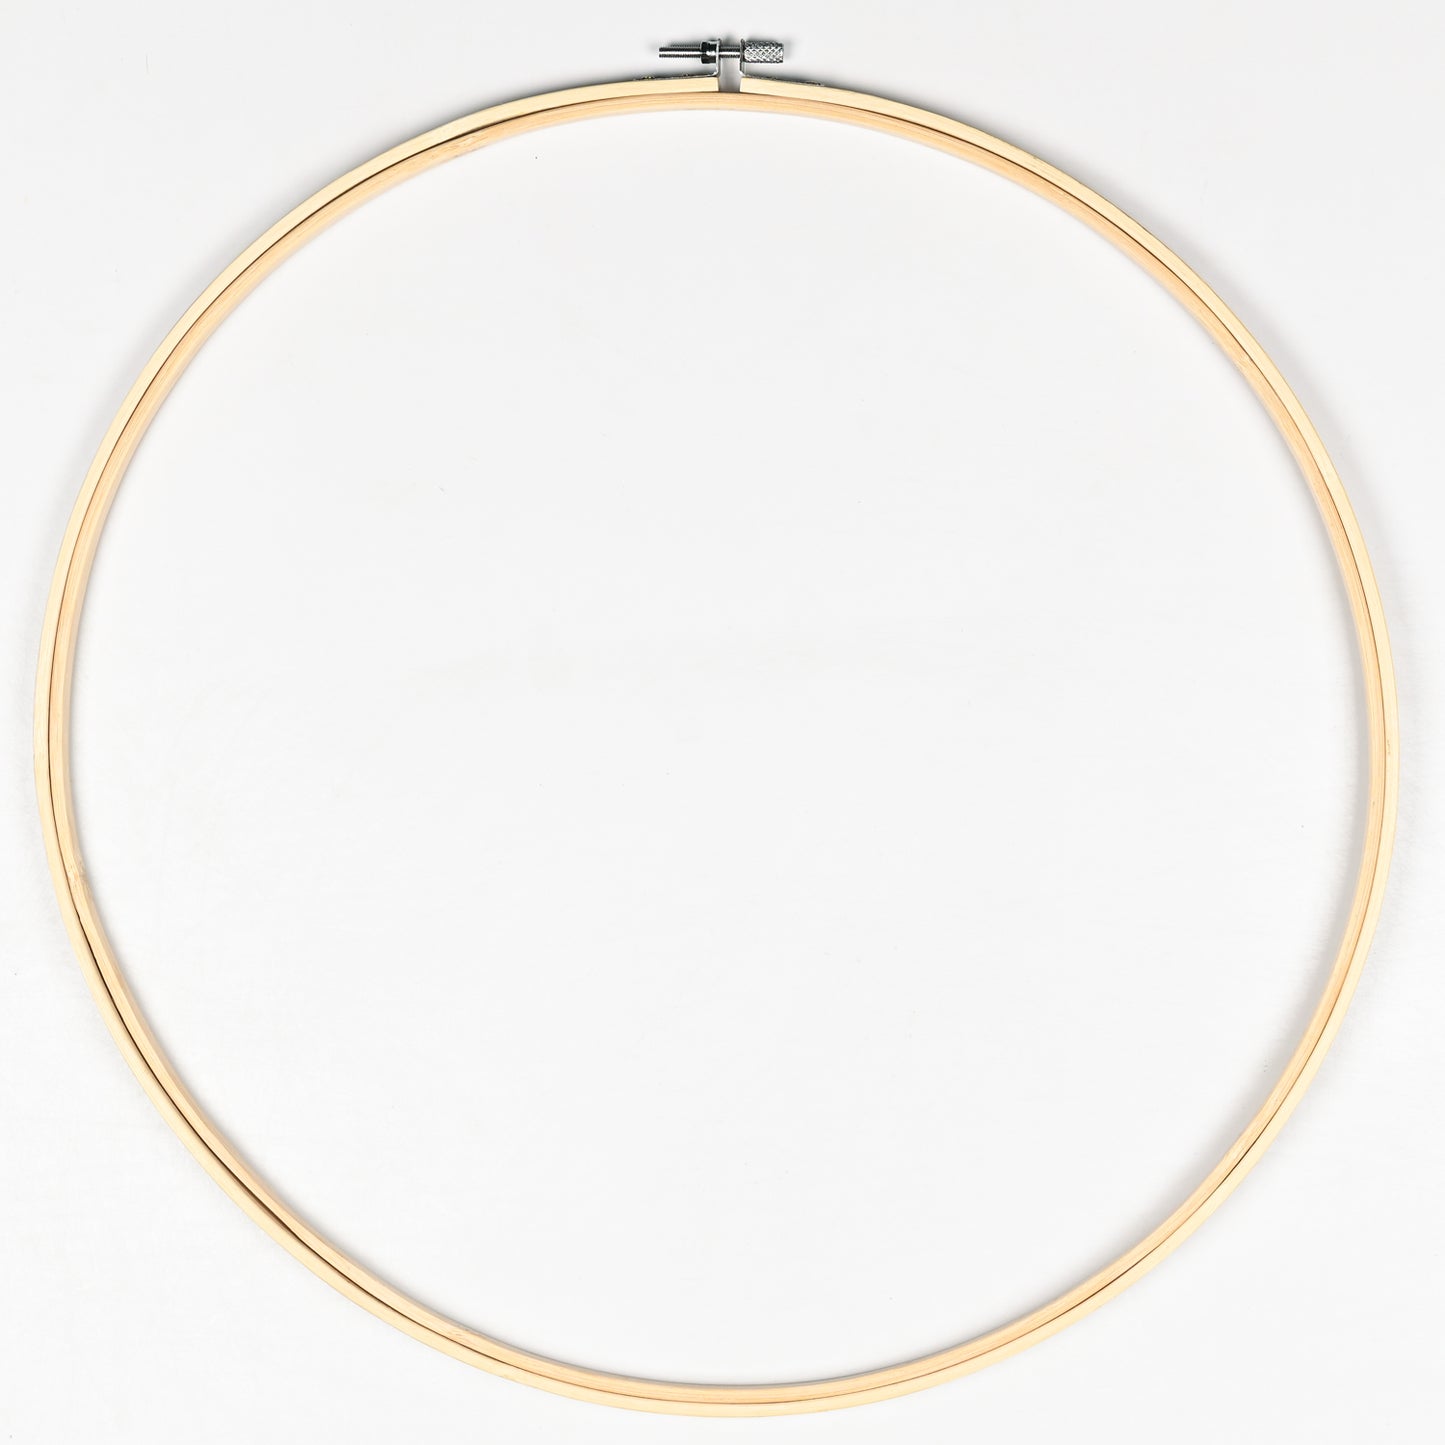 Embroidery Hoops Wooden - 14" / 35cm